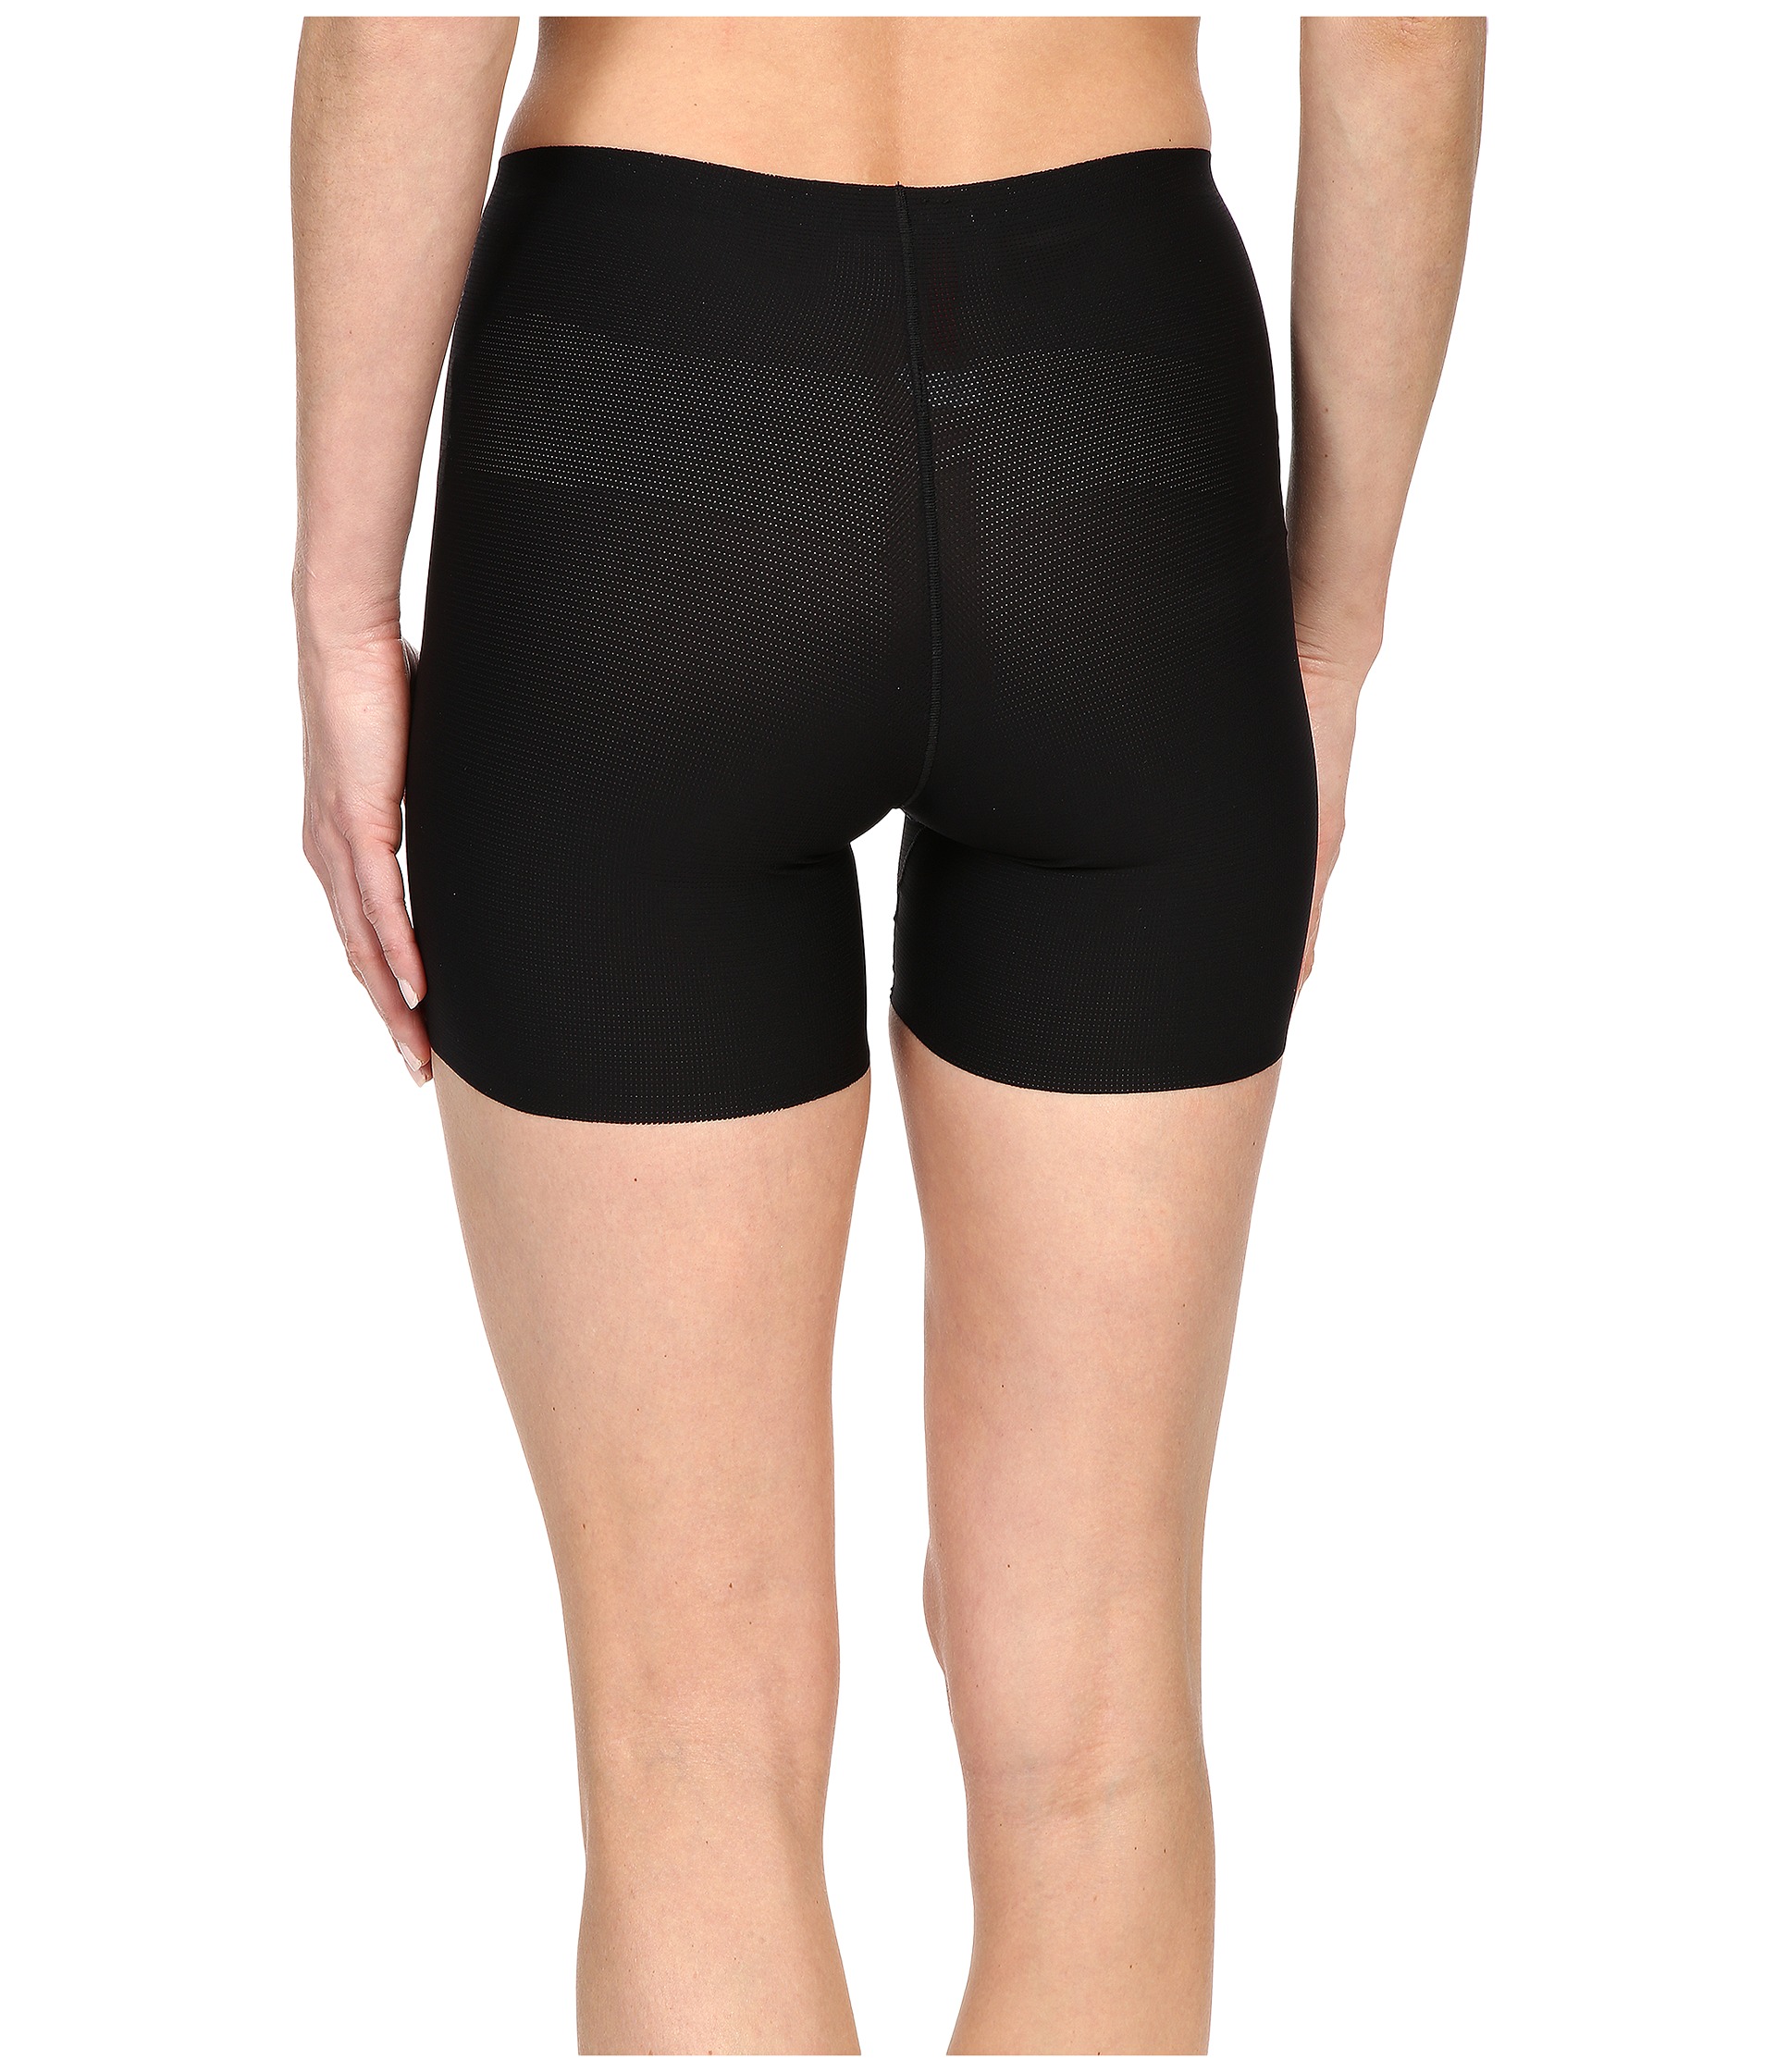 Spanx Perforated Girlshorts at Zappos.com